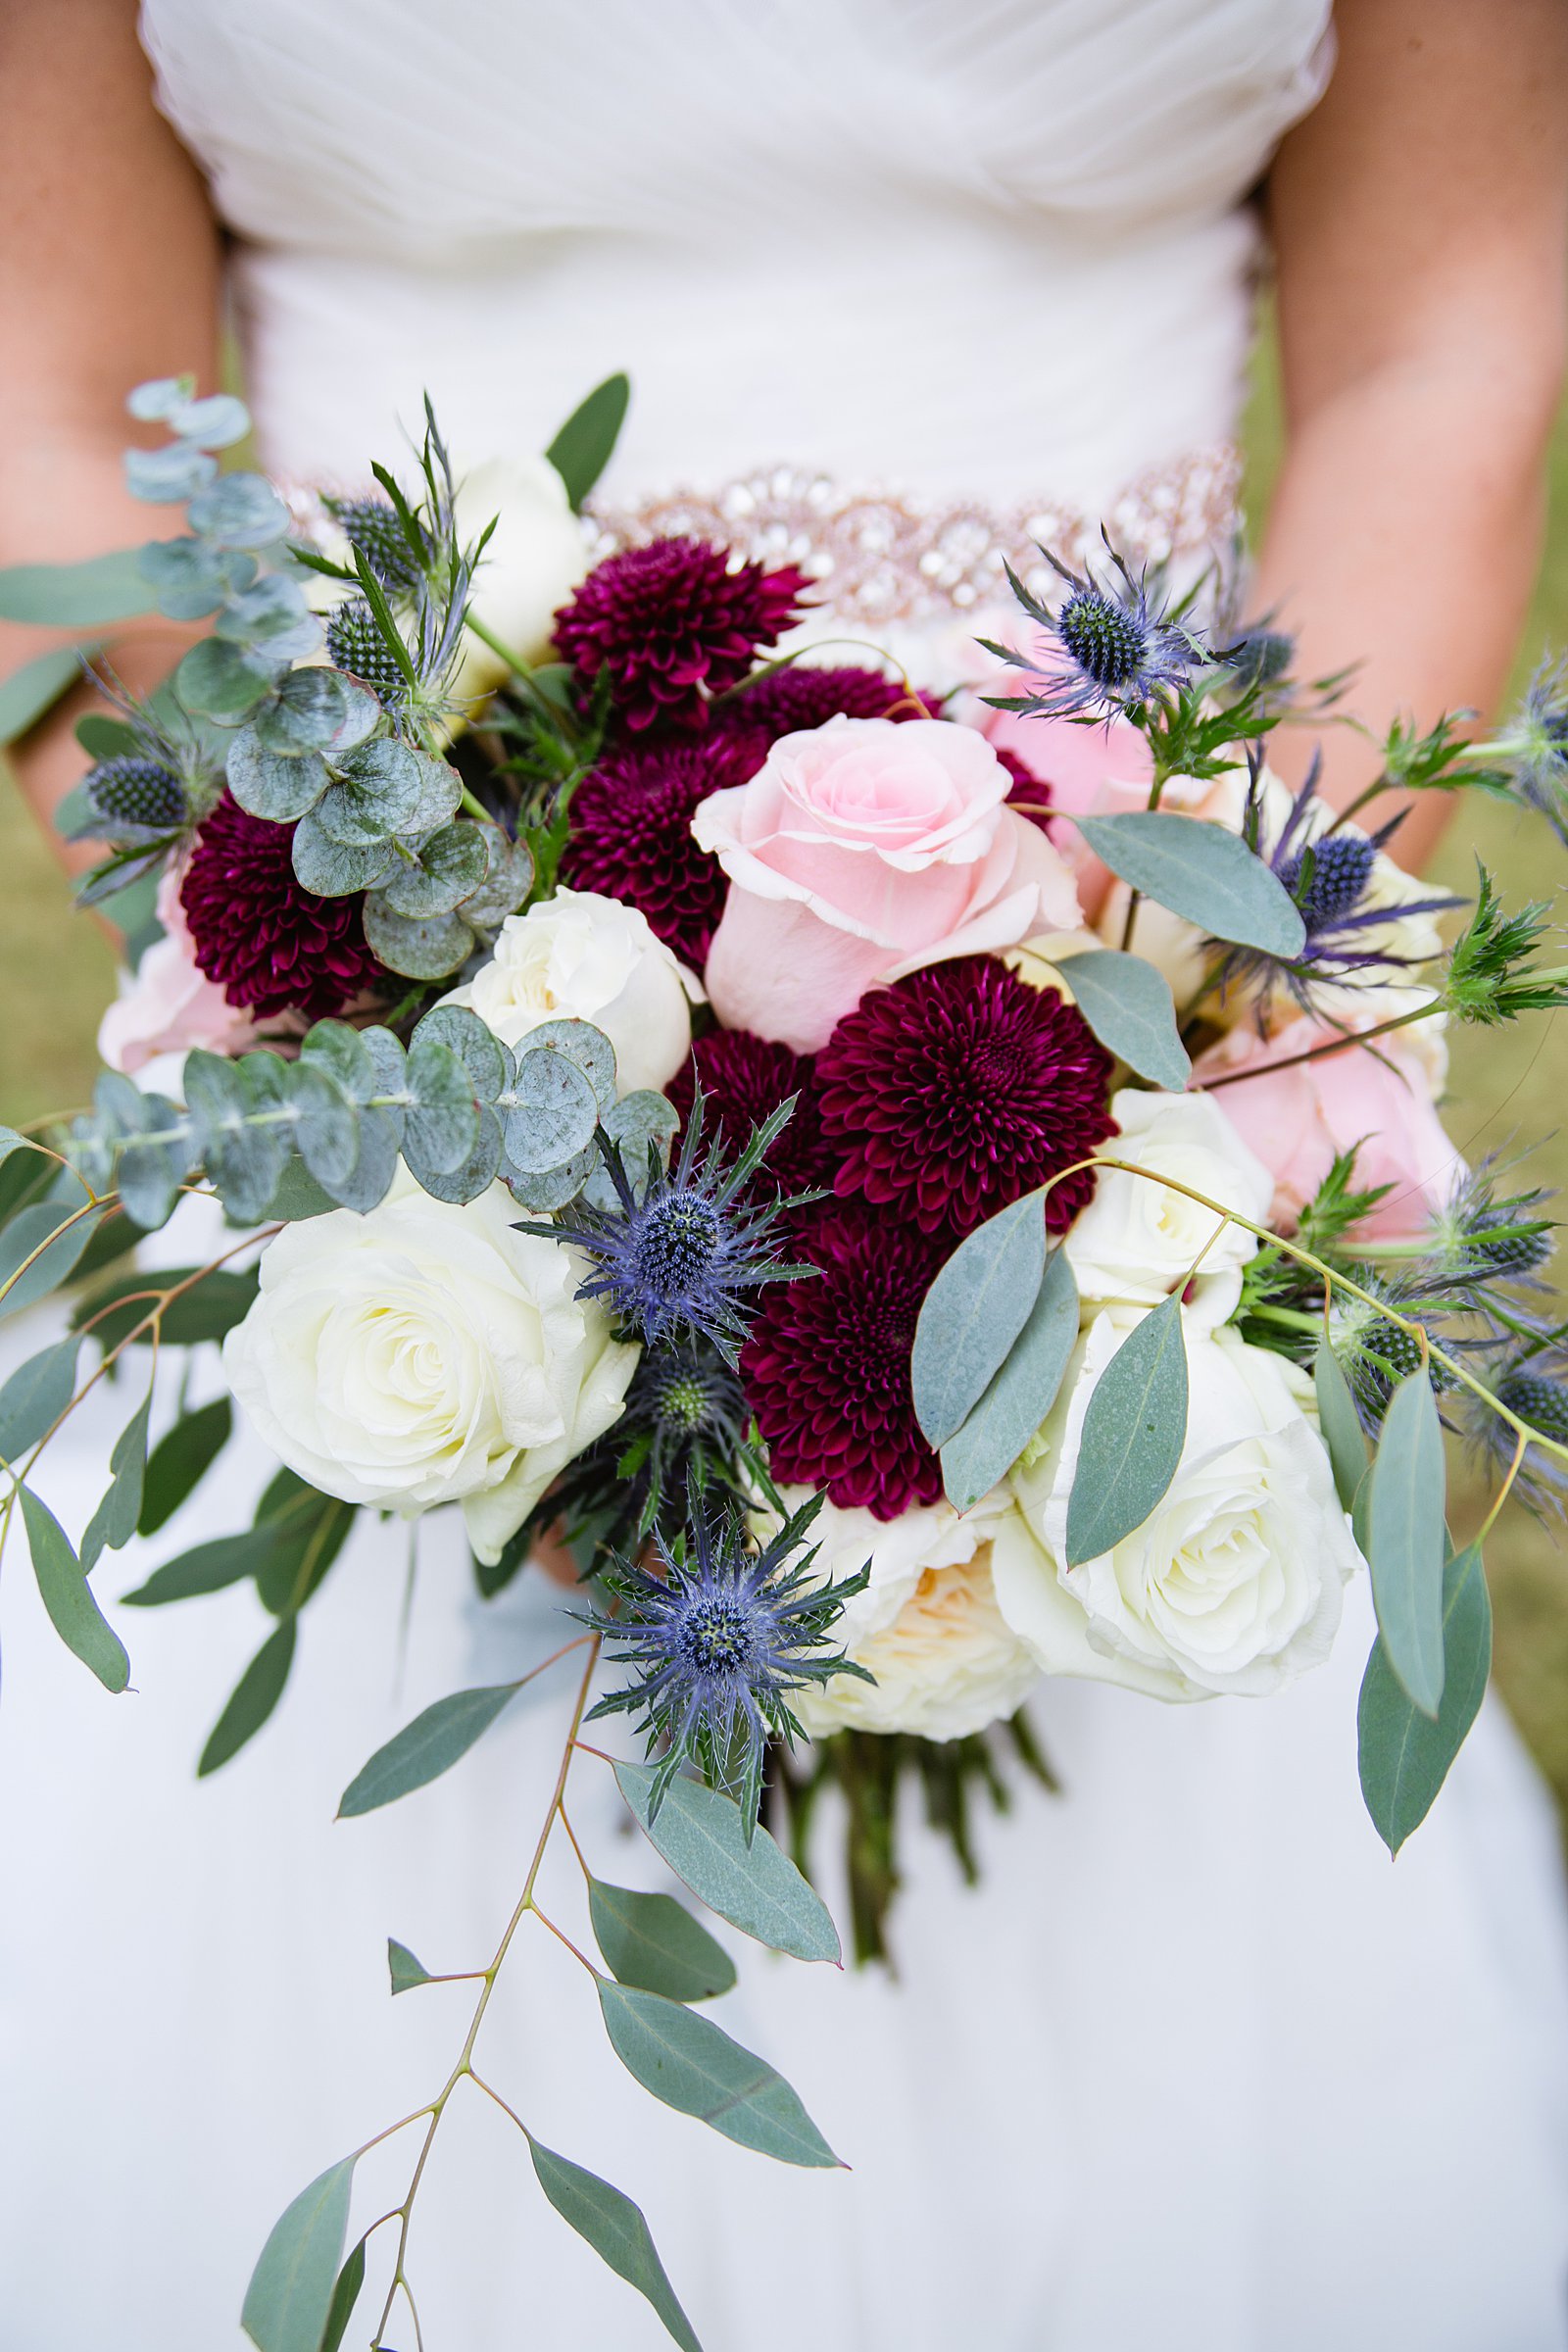 Bride's romantic white, green, pink, and maroon bouquet by PMA Photography.